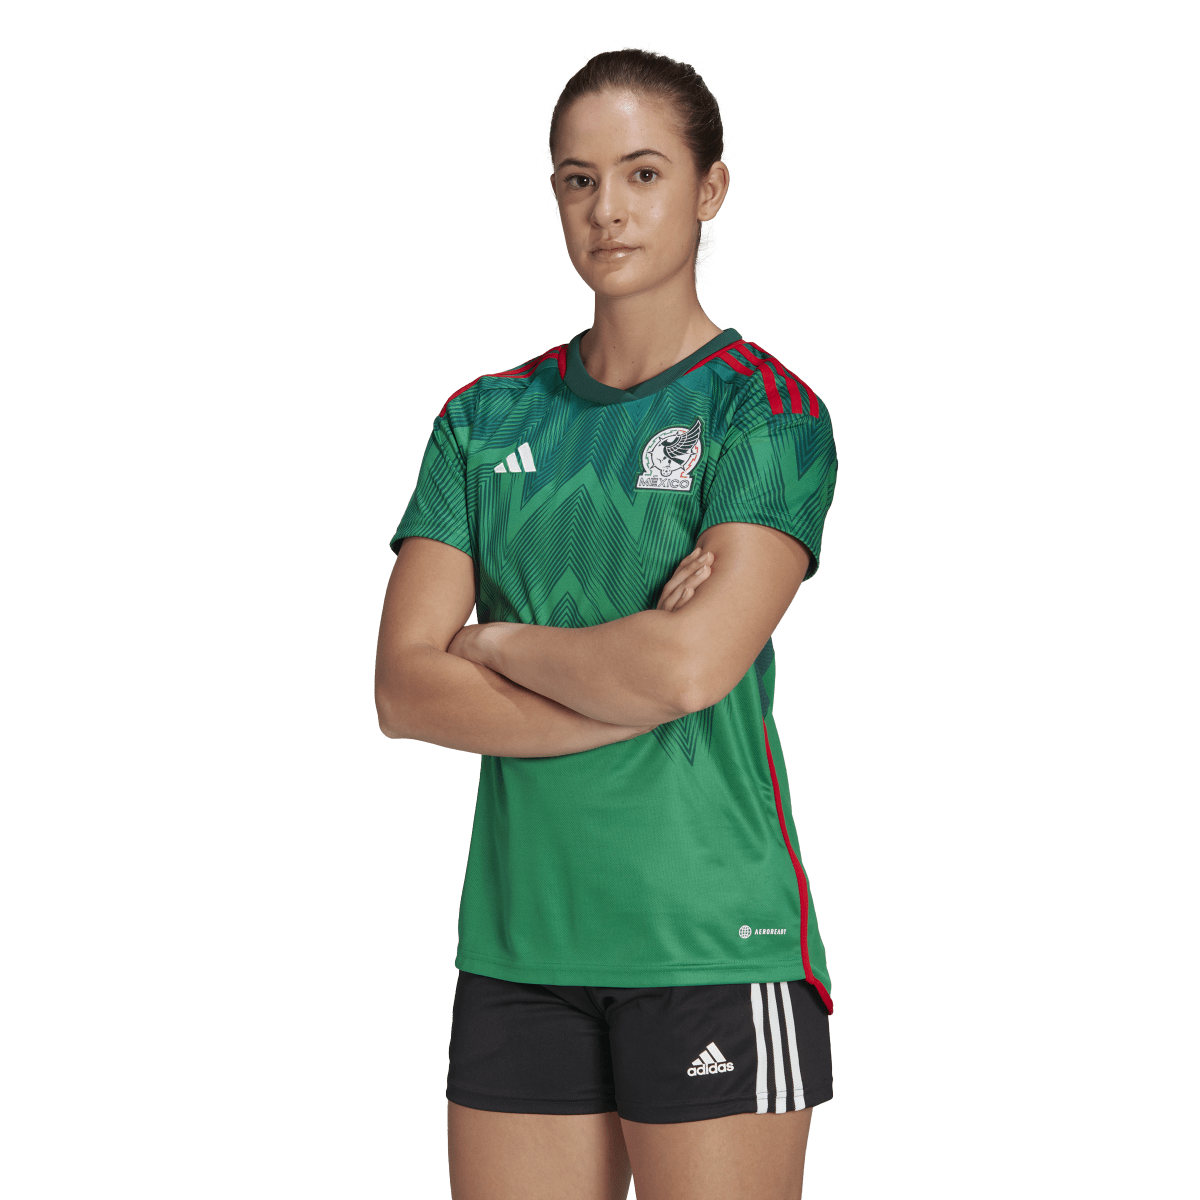 women's mexico national team jersey